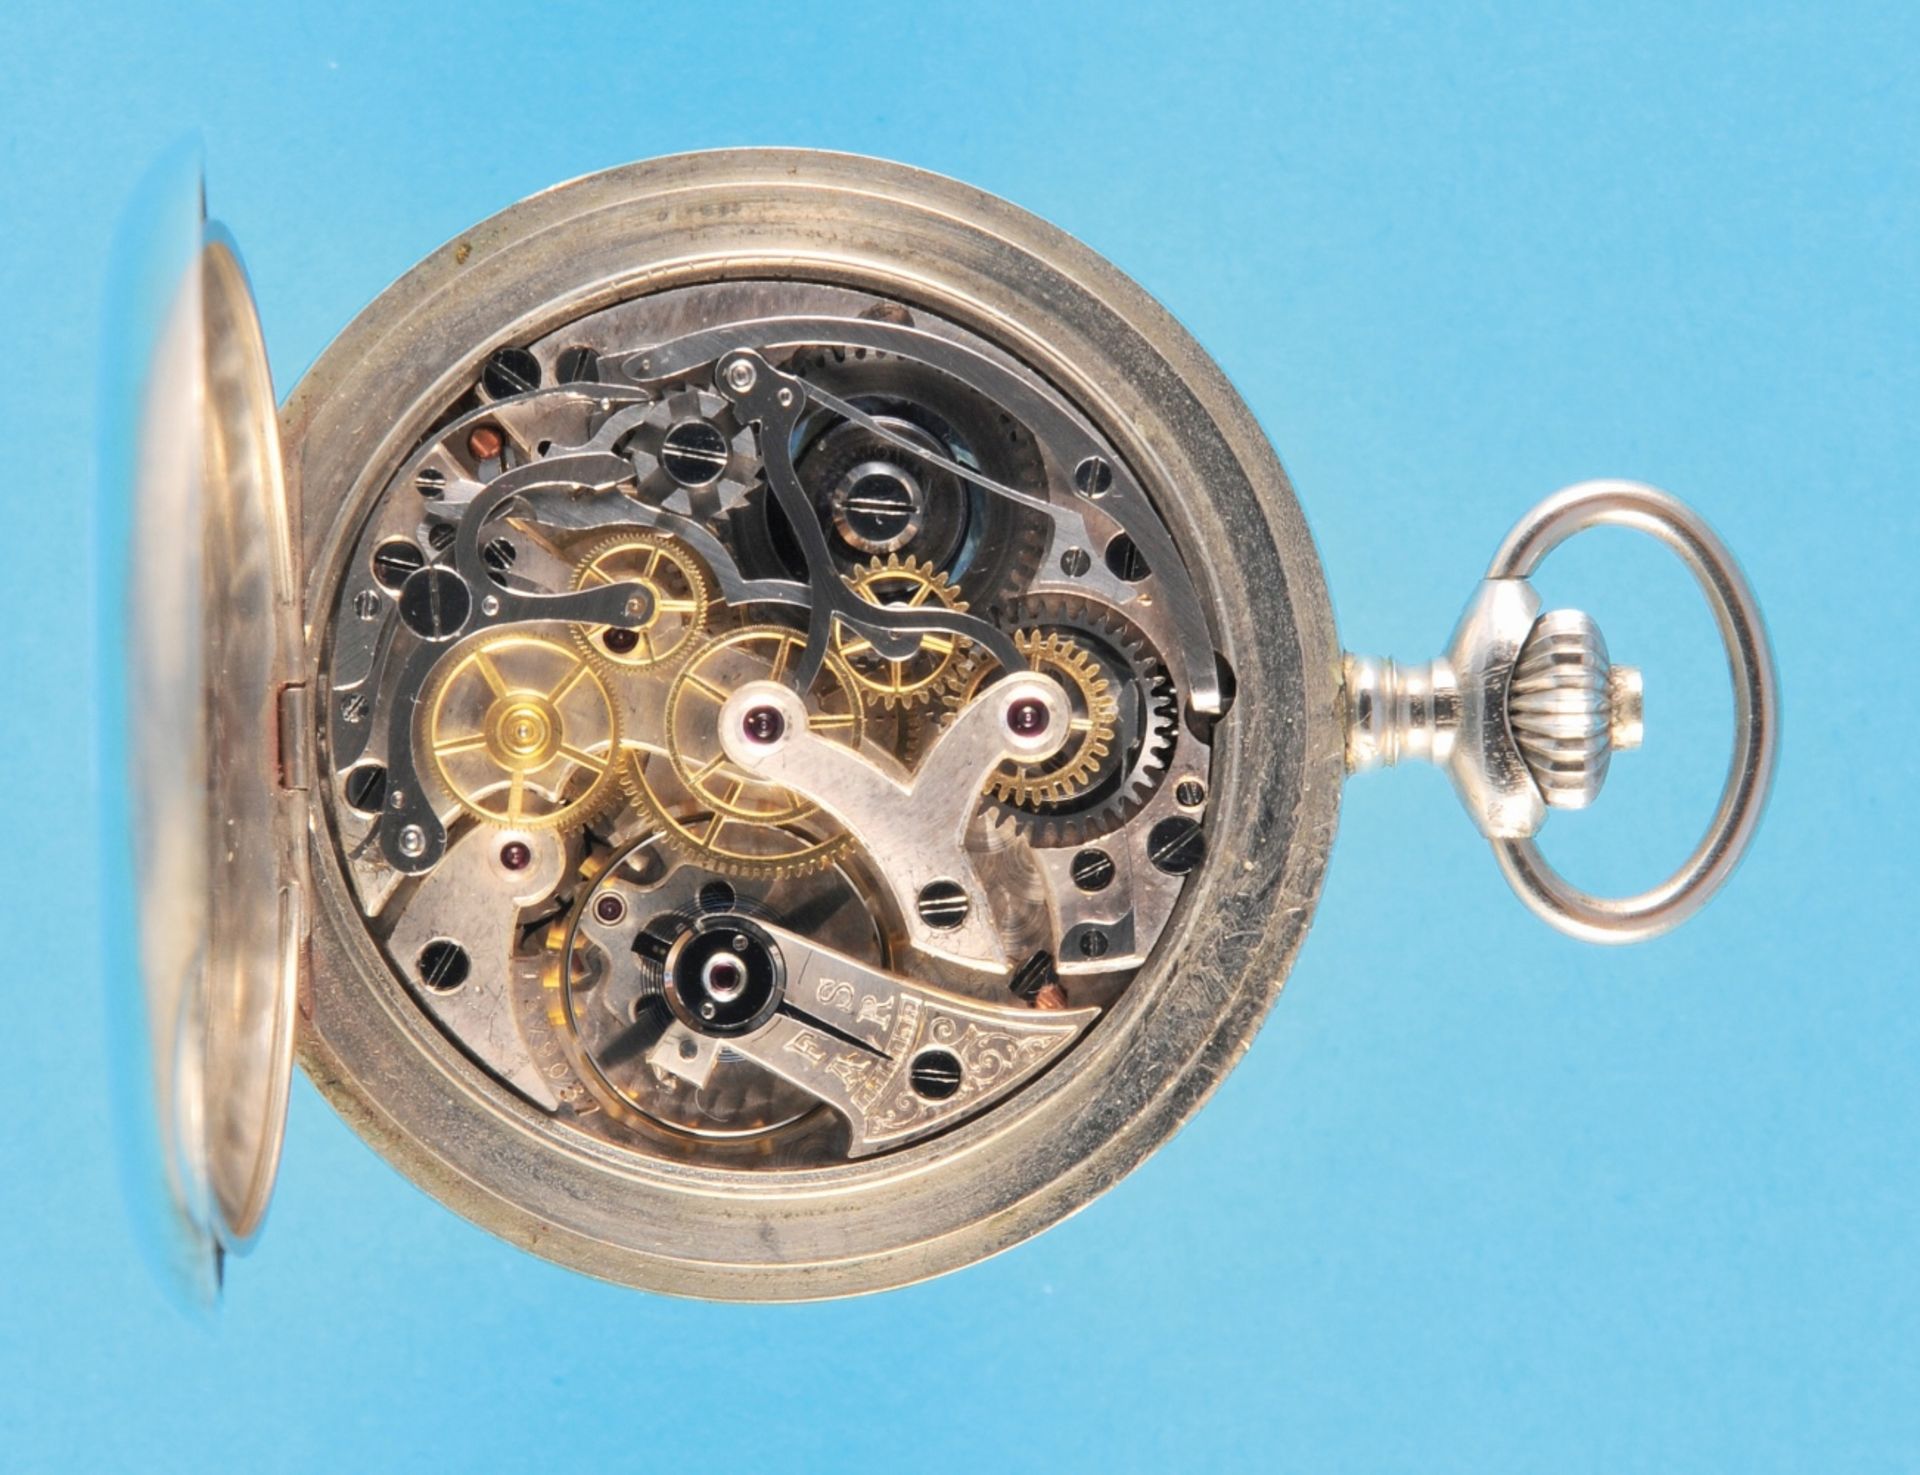 Nickel pocket watch with chronograph 30-minute counter, Minerva, smooth case,